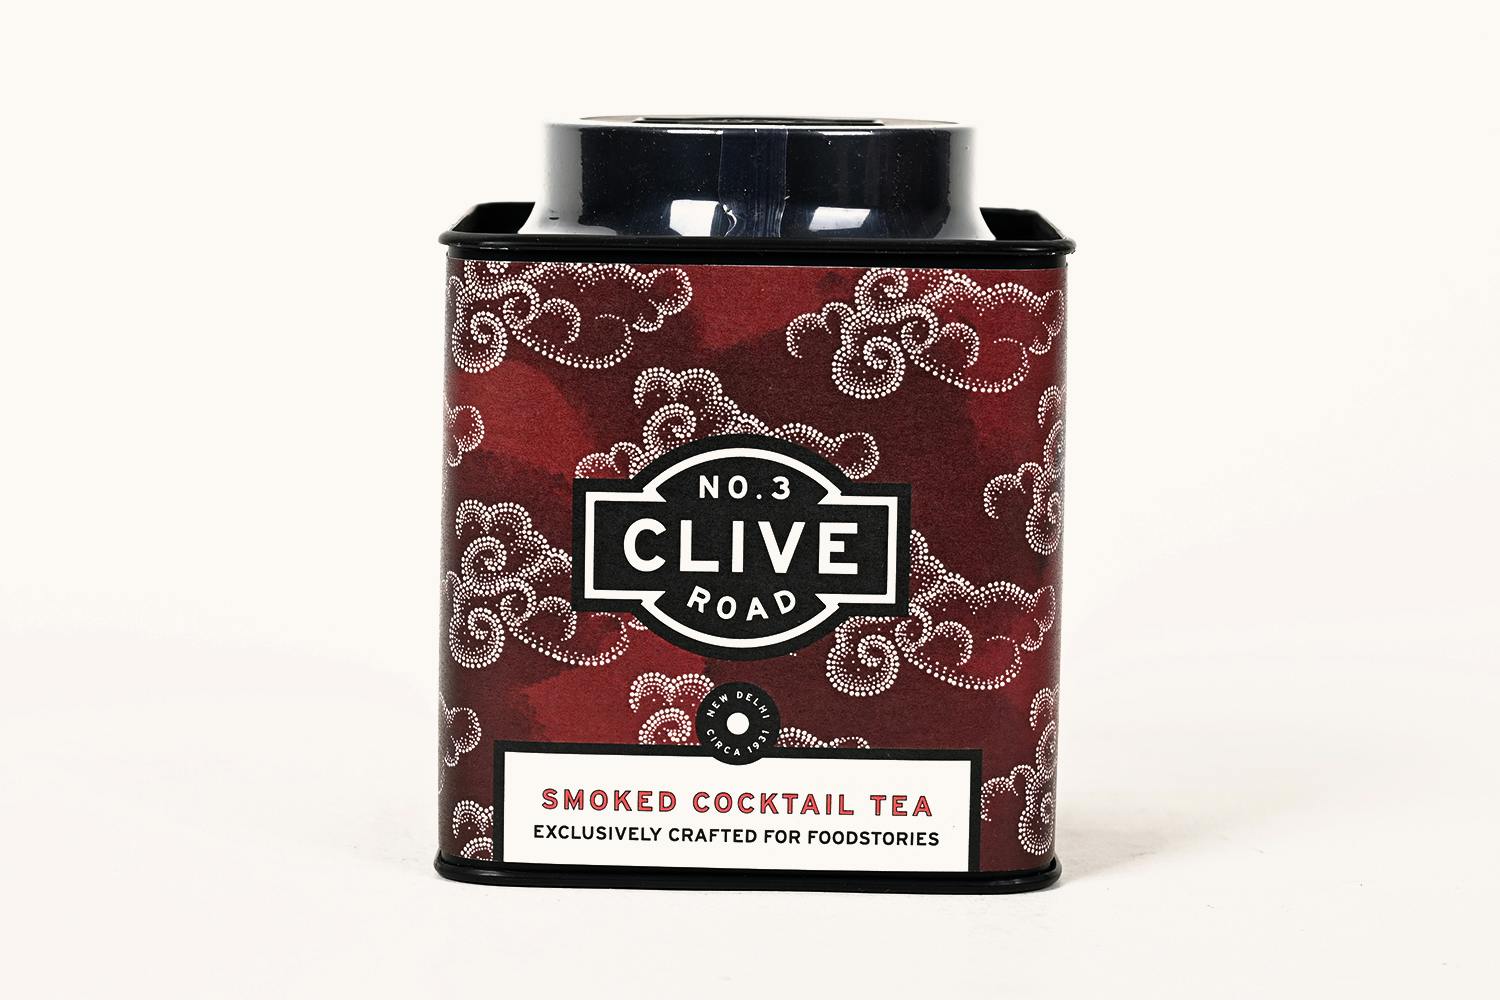 No. 3 Clive Road Smoked Cocktail Tea Blend